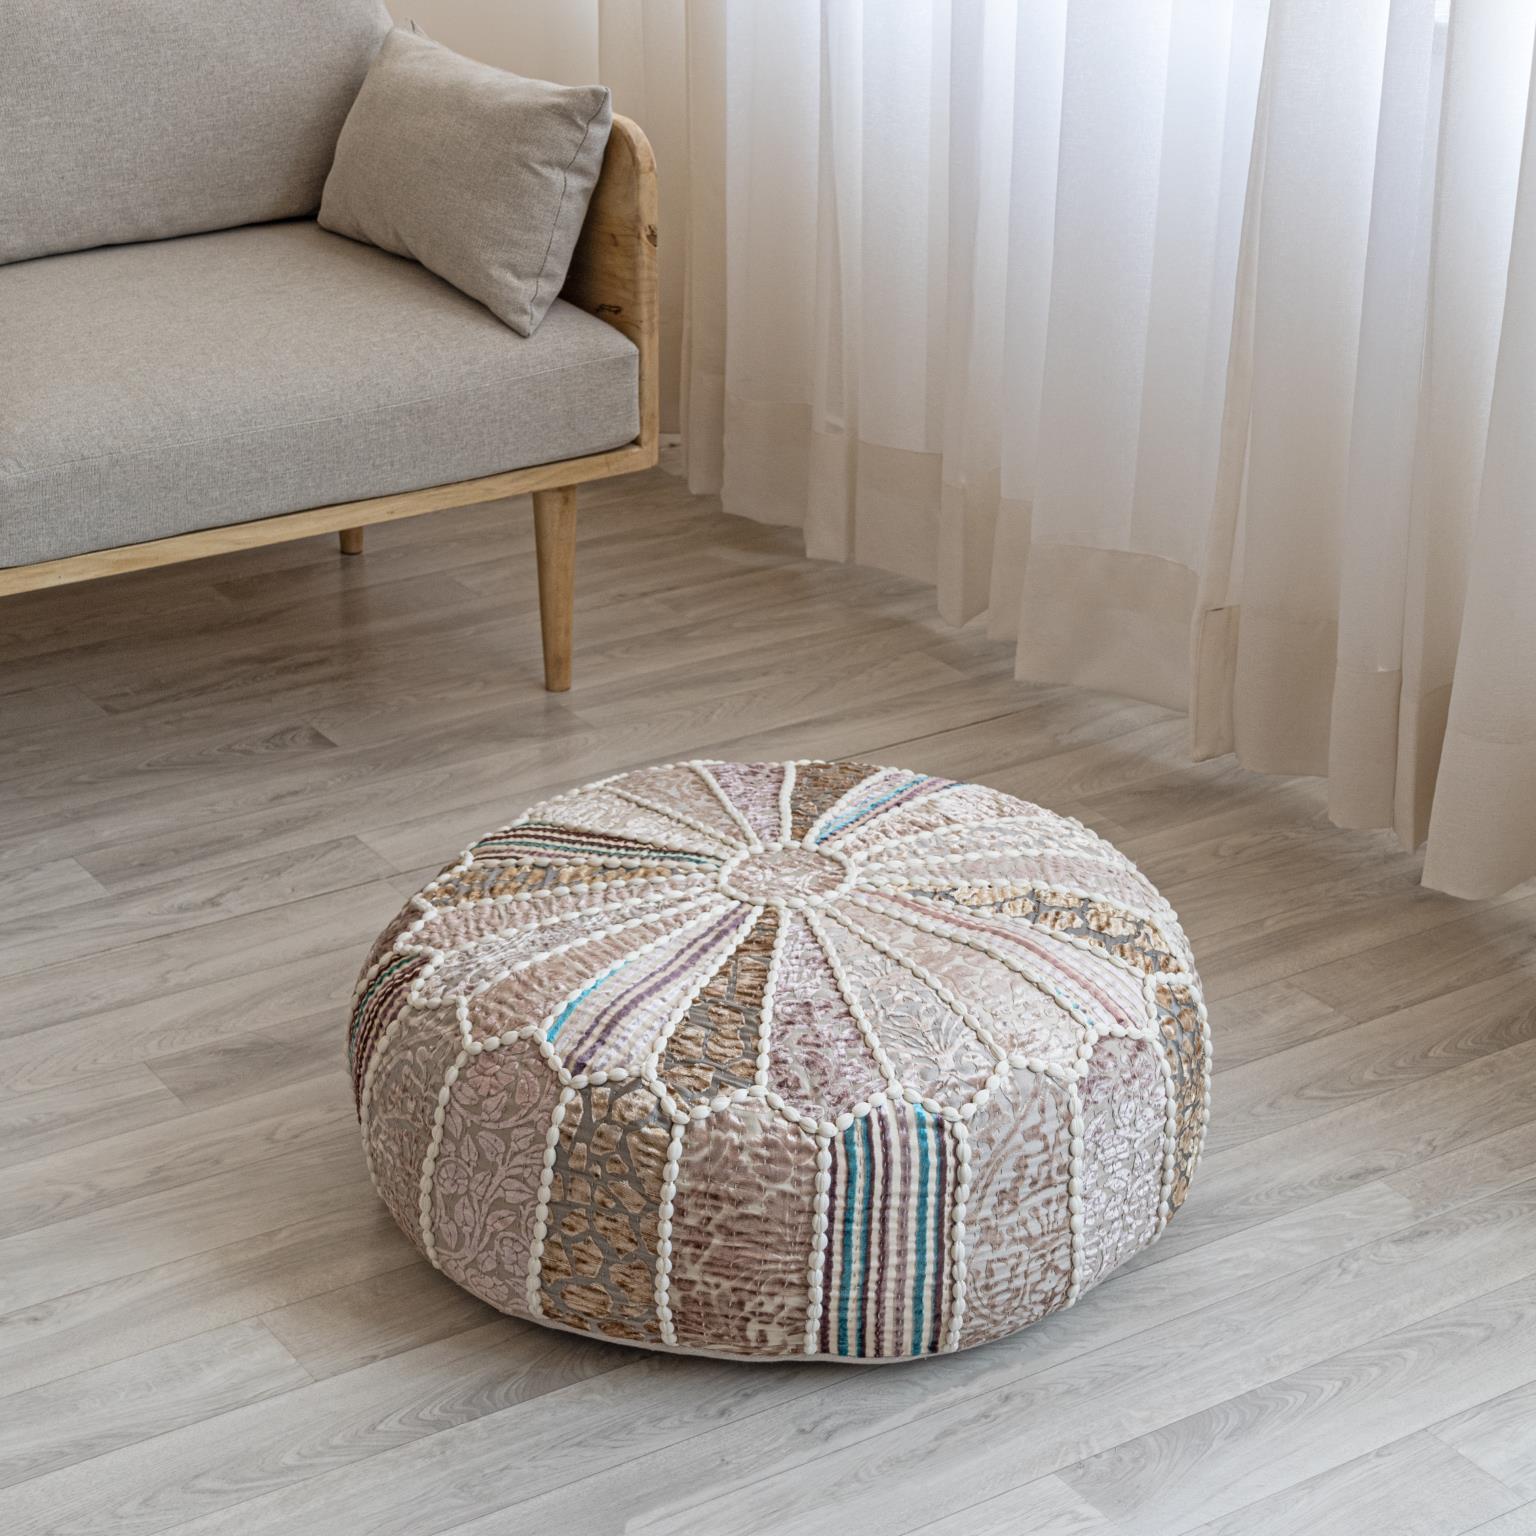 Contemporary Ottoman 1124 Round Pouf 718852653014 718852653014 in Brown Fabric